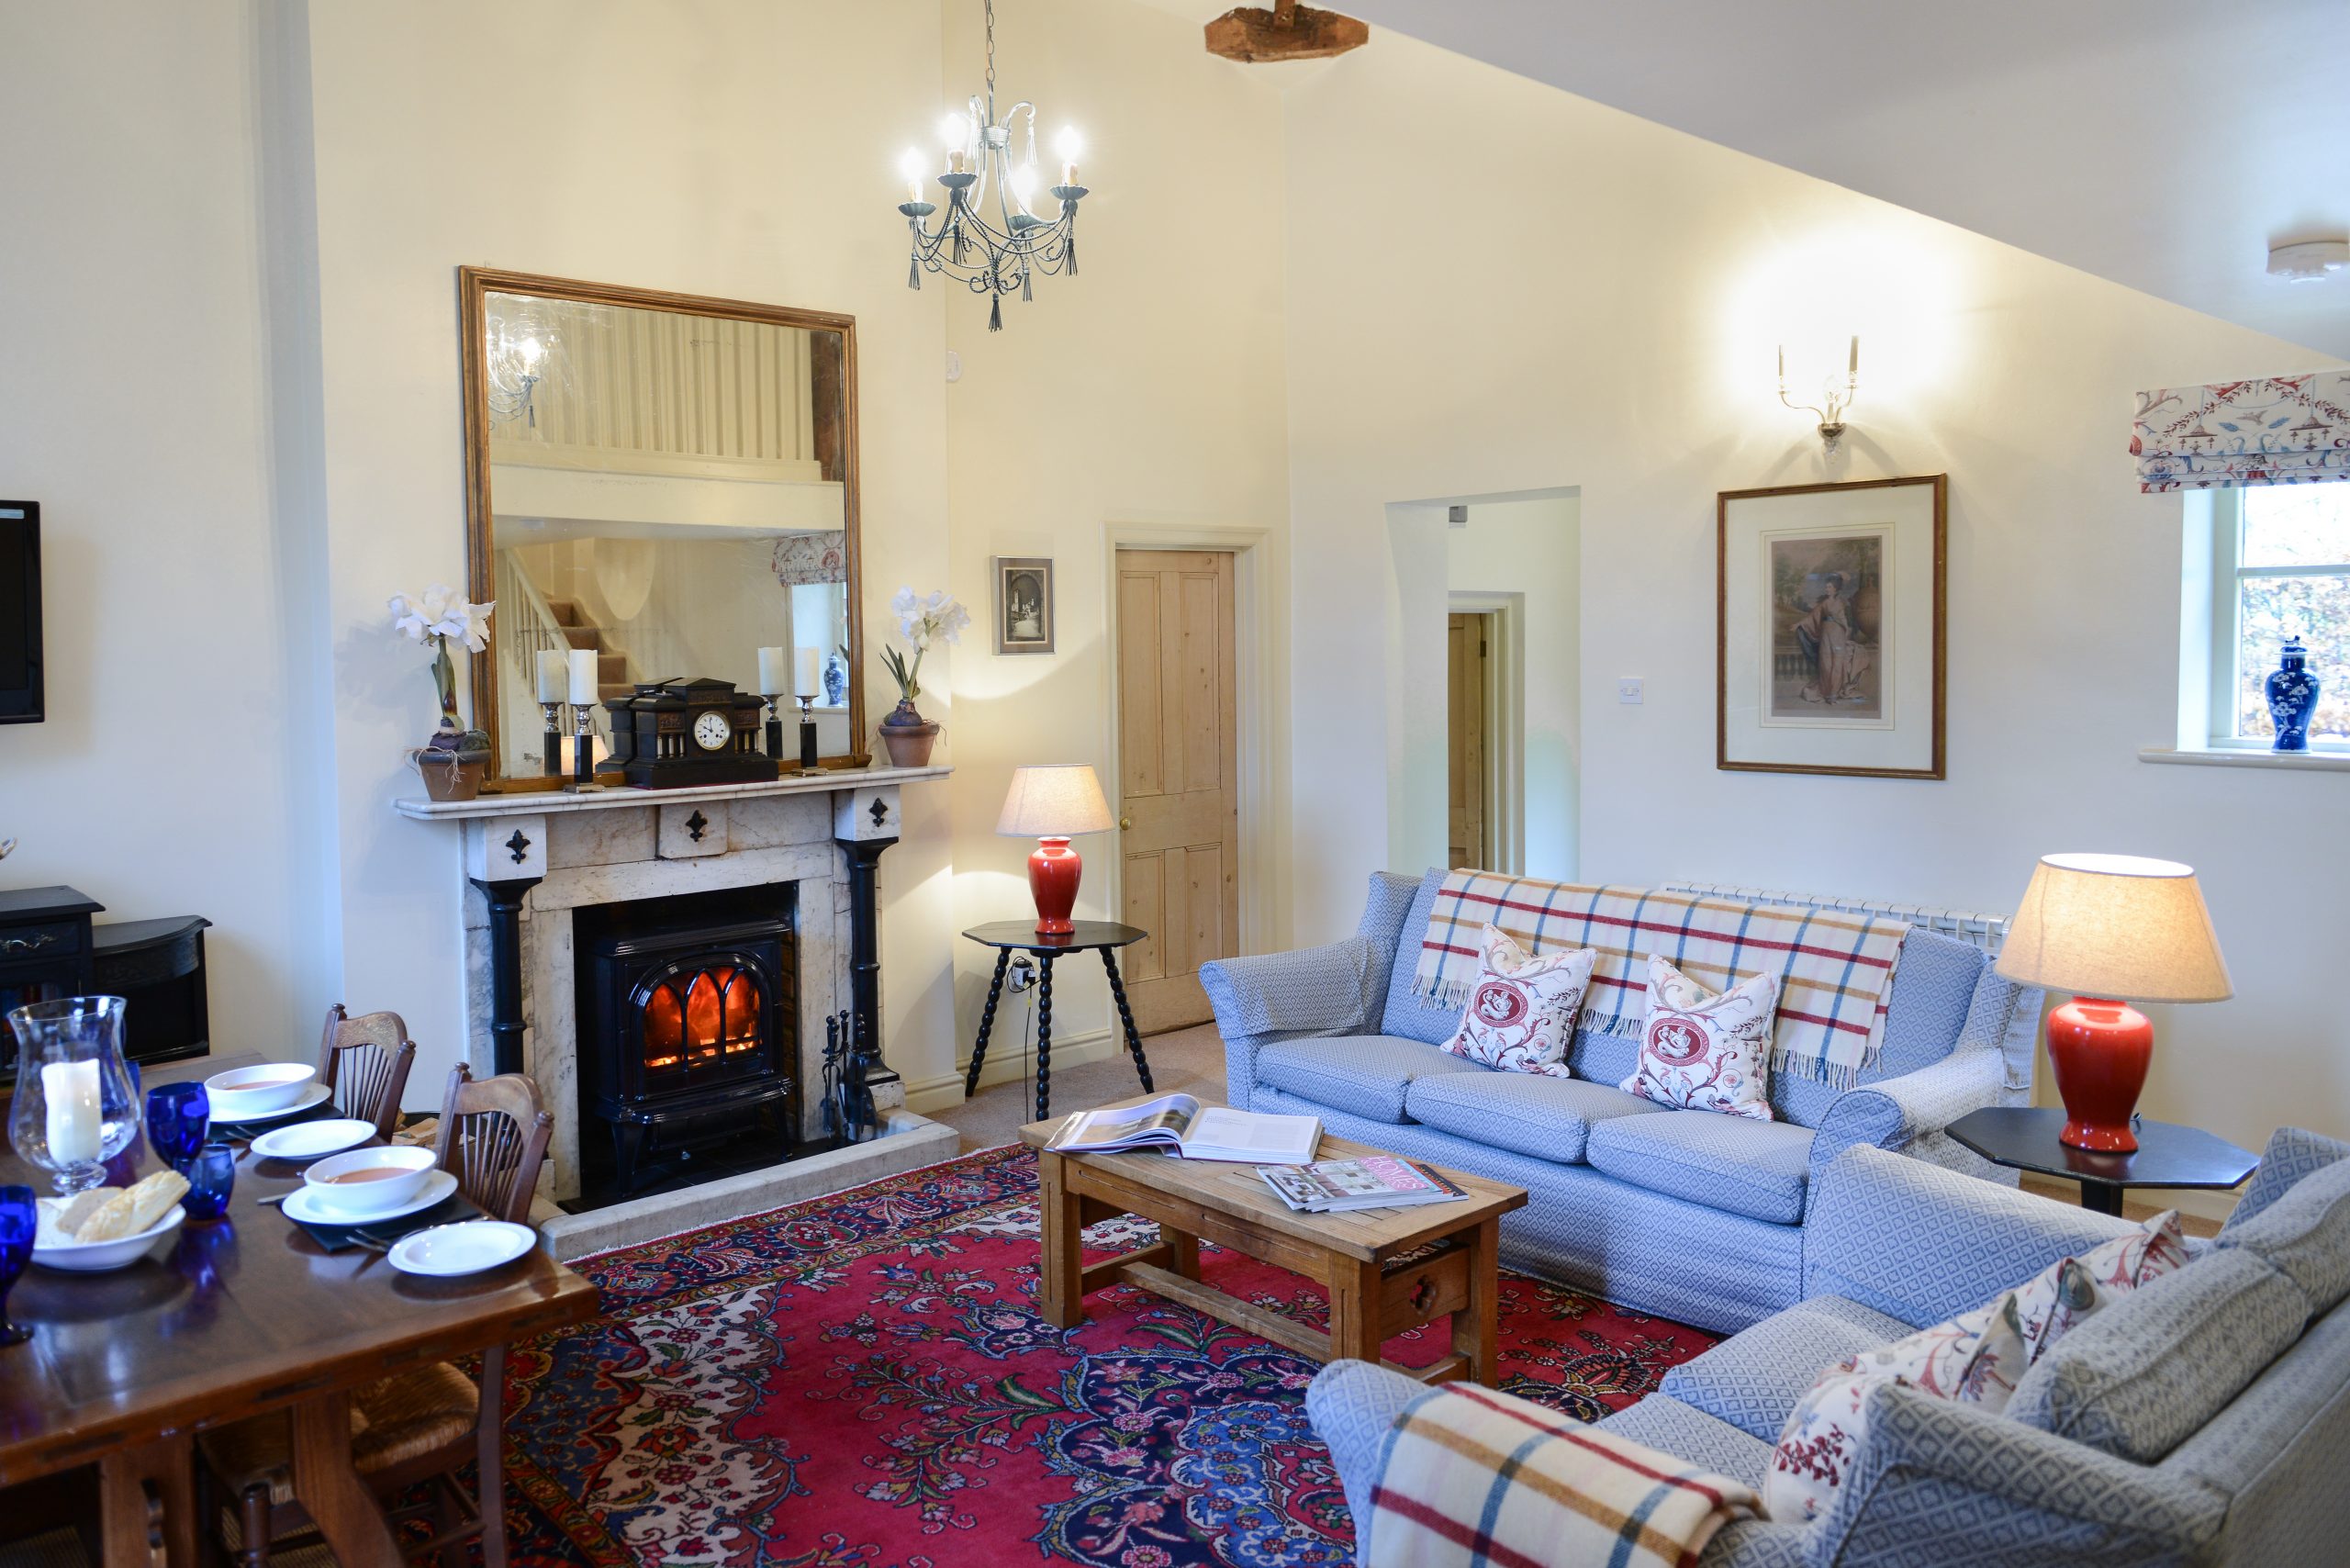 Self-catering holiday cottages in Cheshire, UK